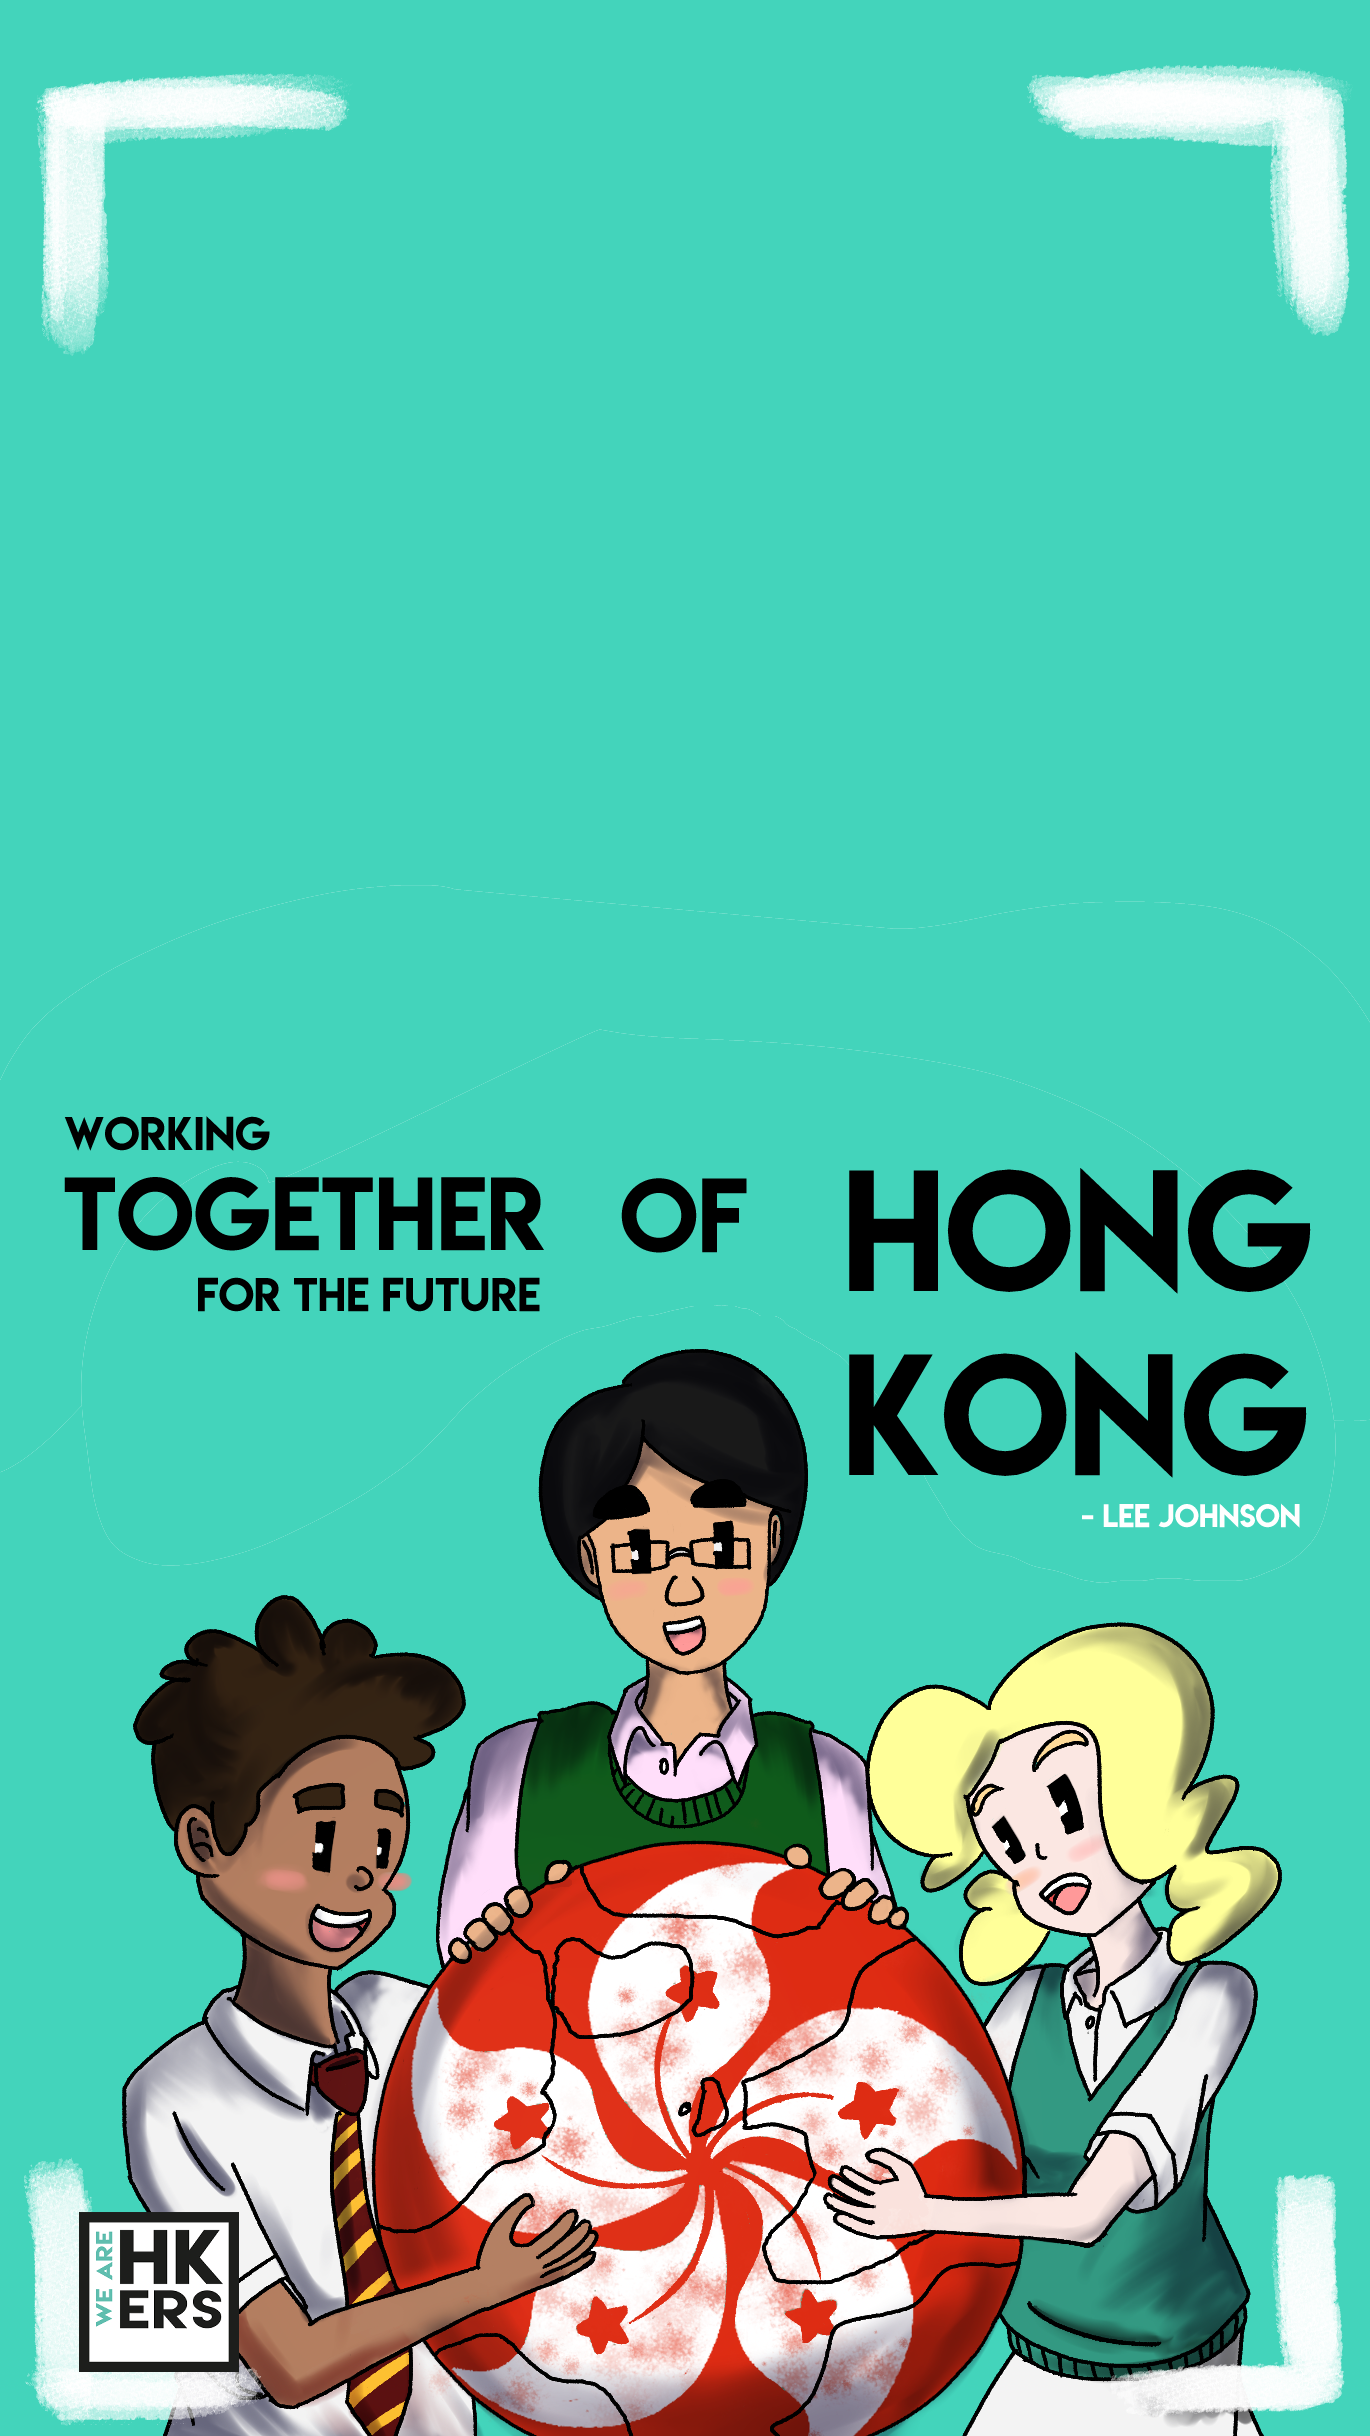 Lee Johnson, Educator at an international school | Working Together for the Future of Hong Kong